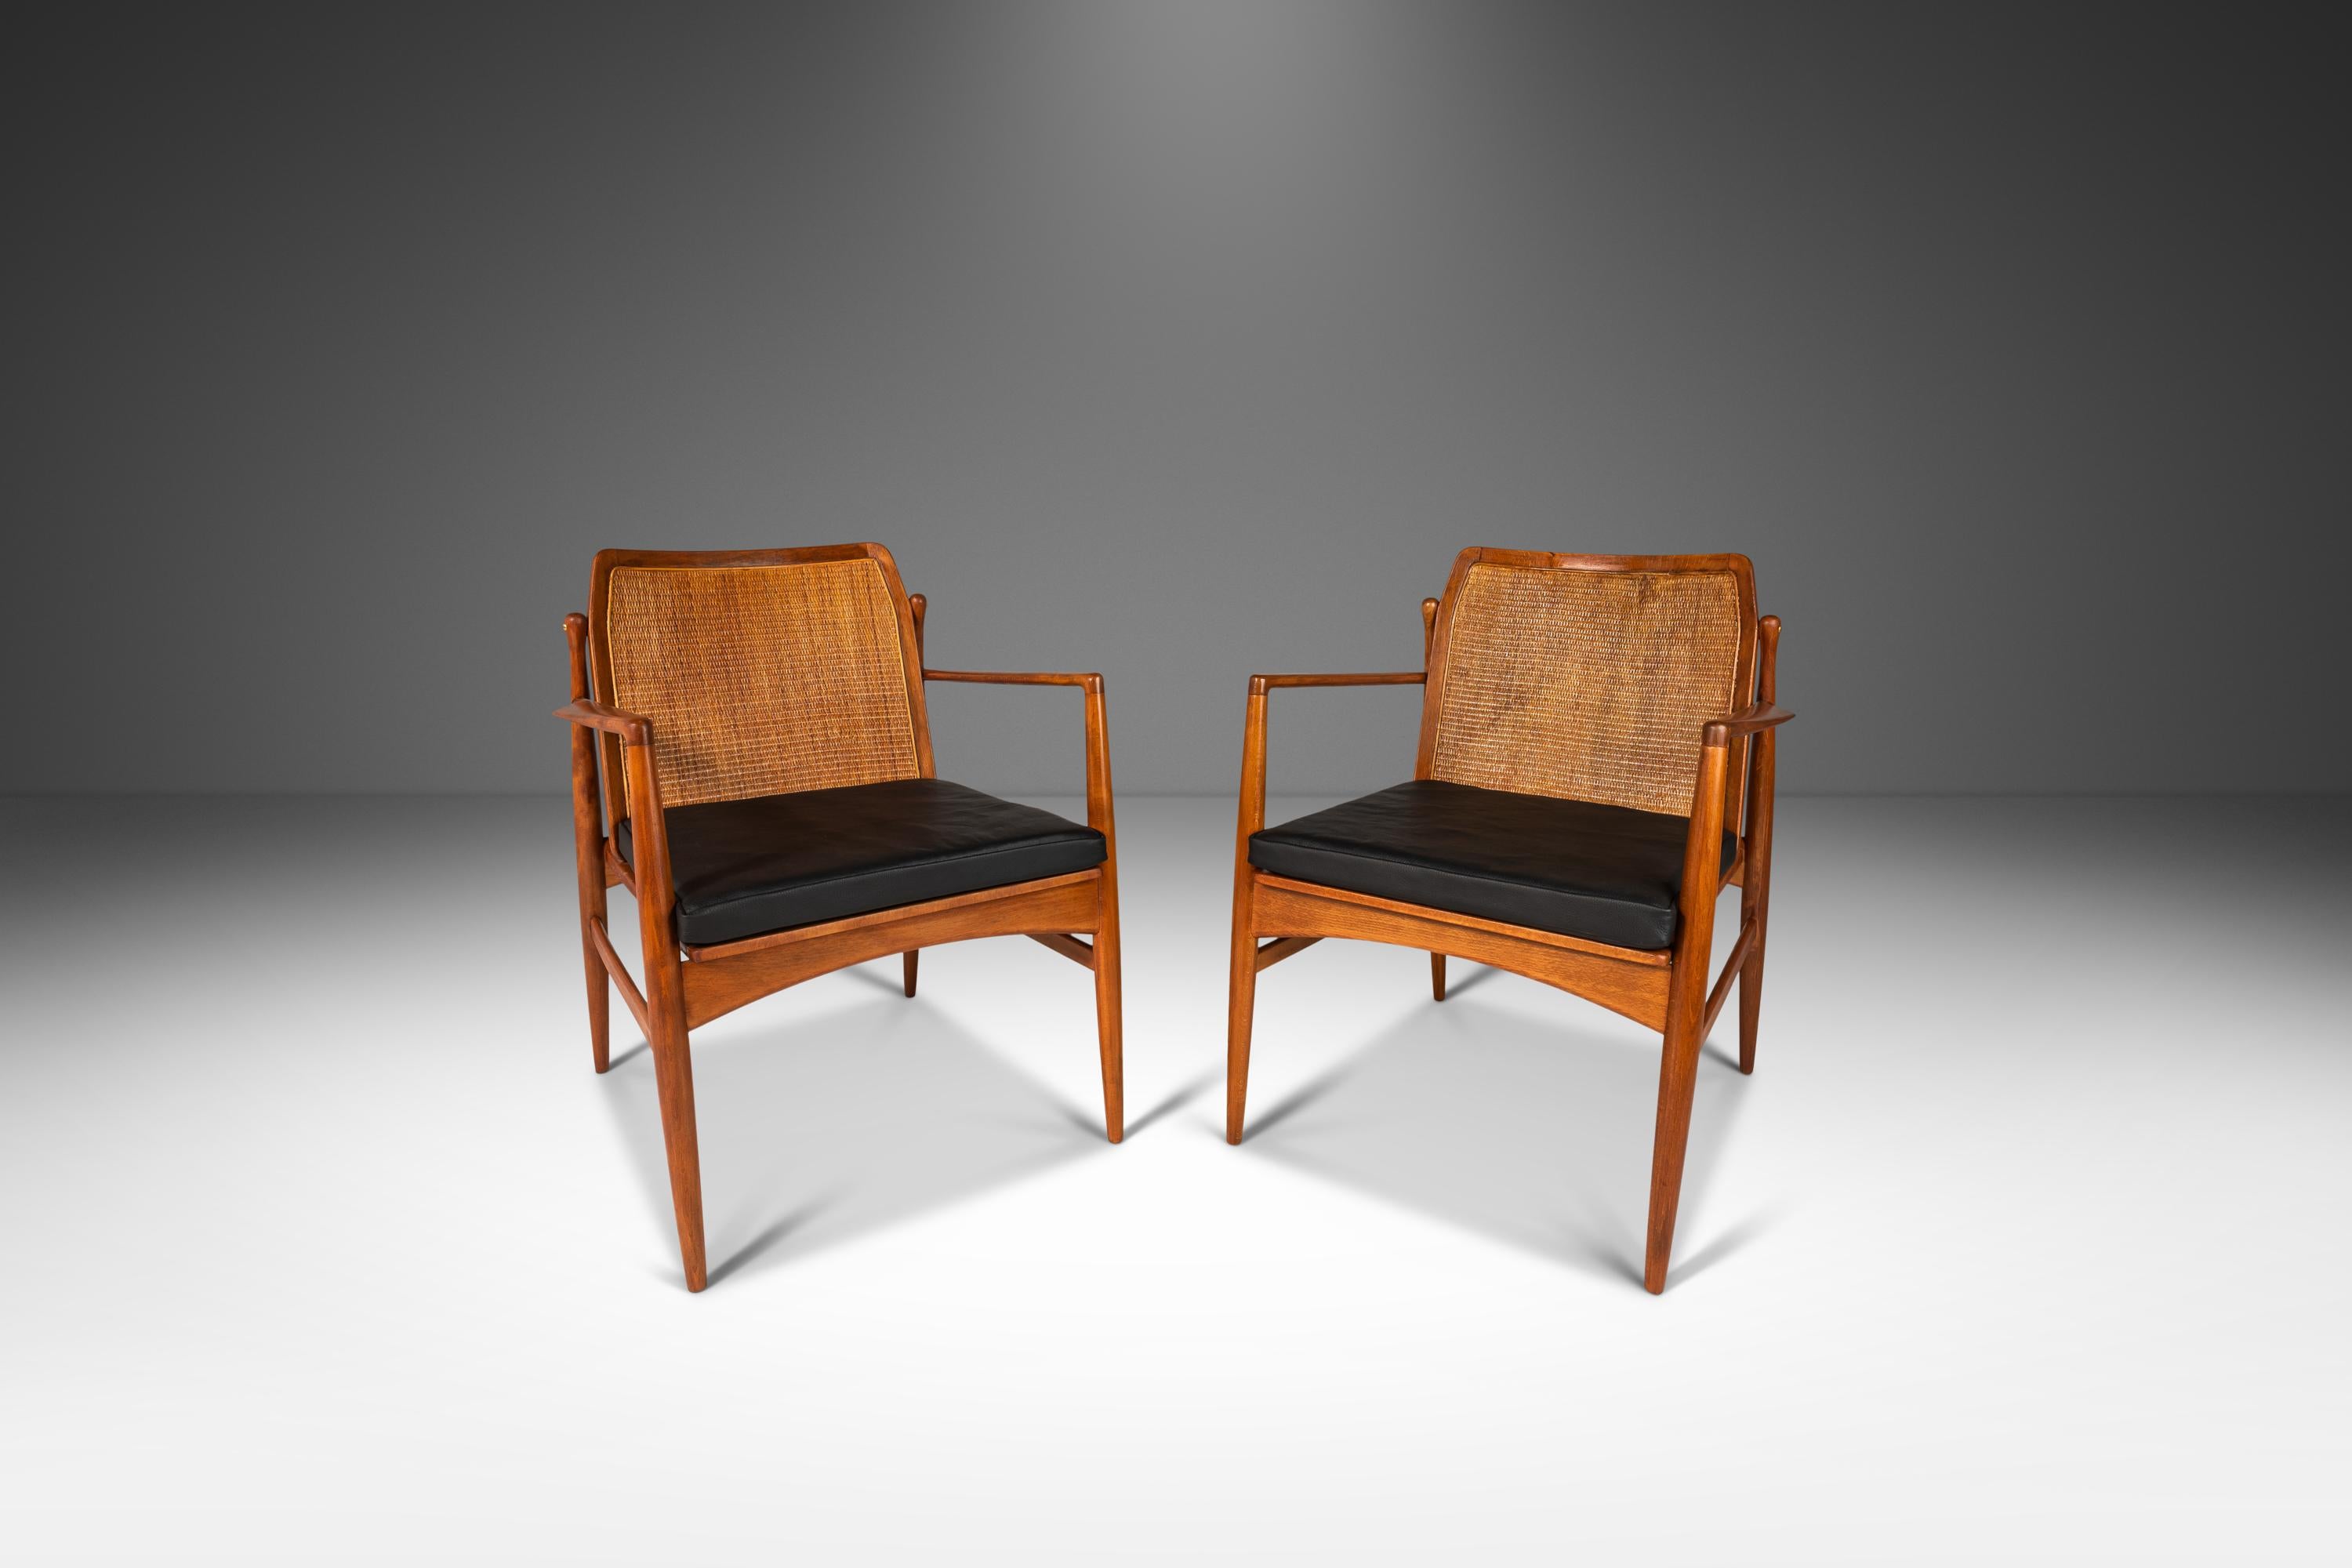 Introducing a true Danish Modern masterpiece: a set of two cane back lounge chairs designed by the incomparable Ib Kofod Larsen for Selig. This iconic set has been fully restored and newly upholstered, making it the perfect addition to any modern